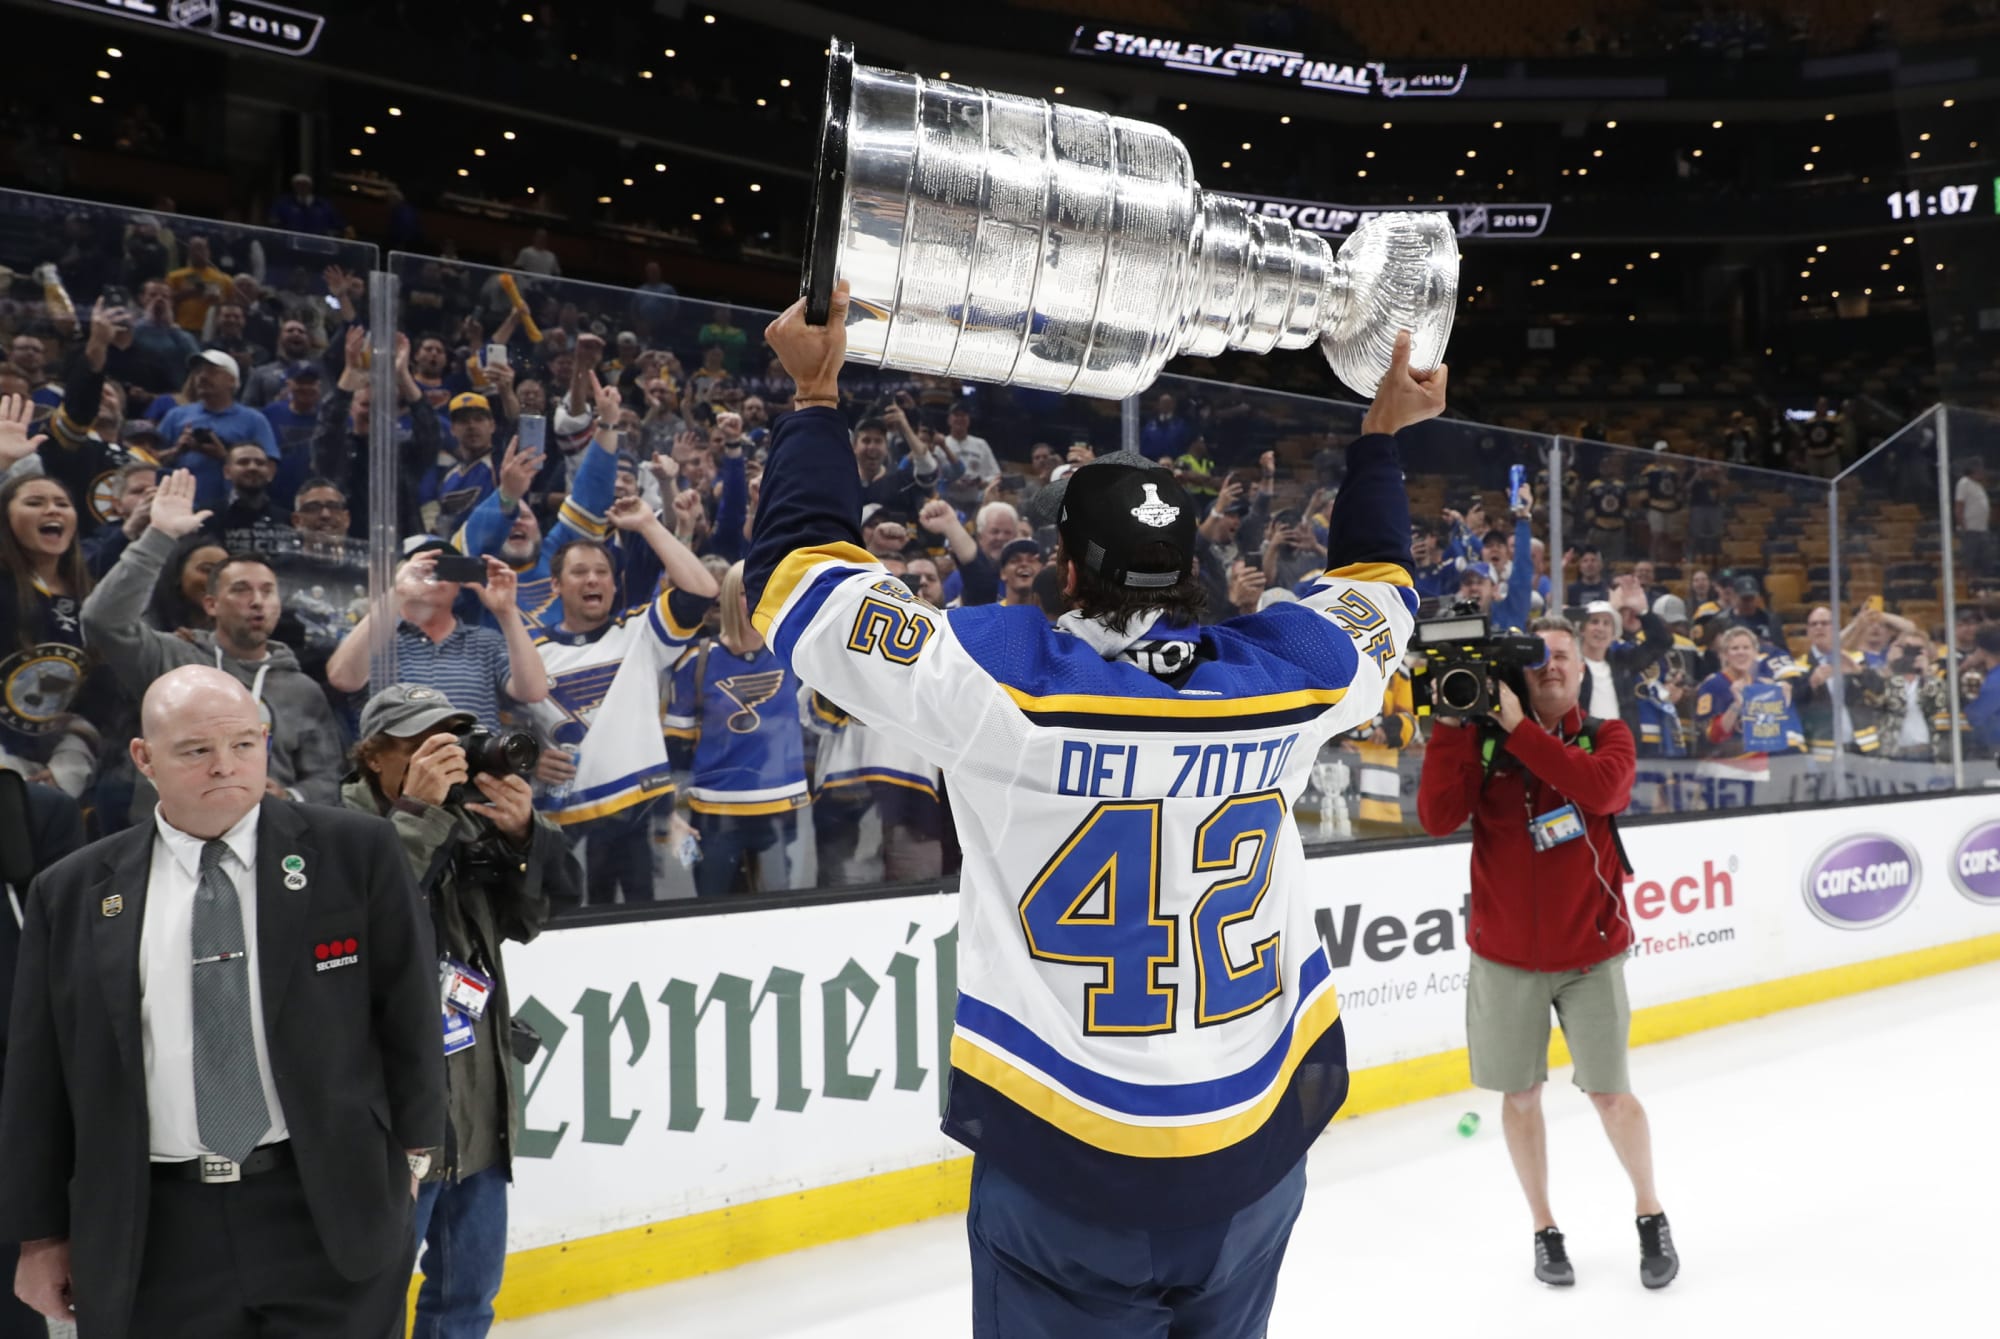 St. Louis Blues Depth Tested Without Michael Del Zotto